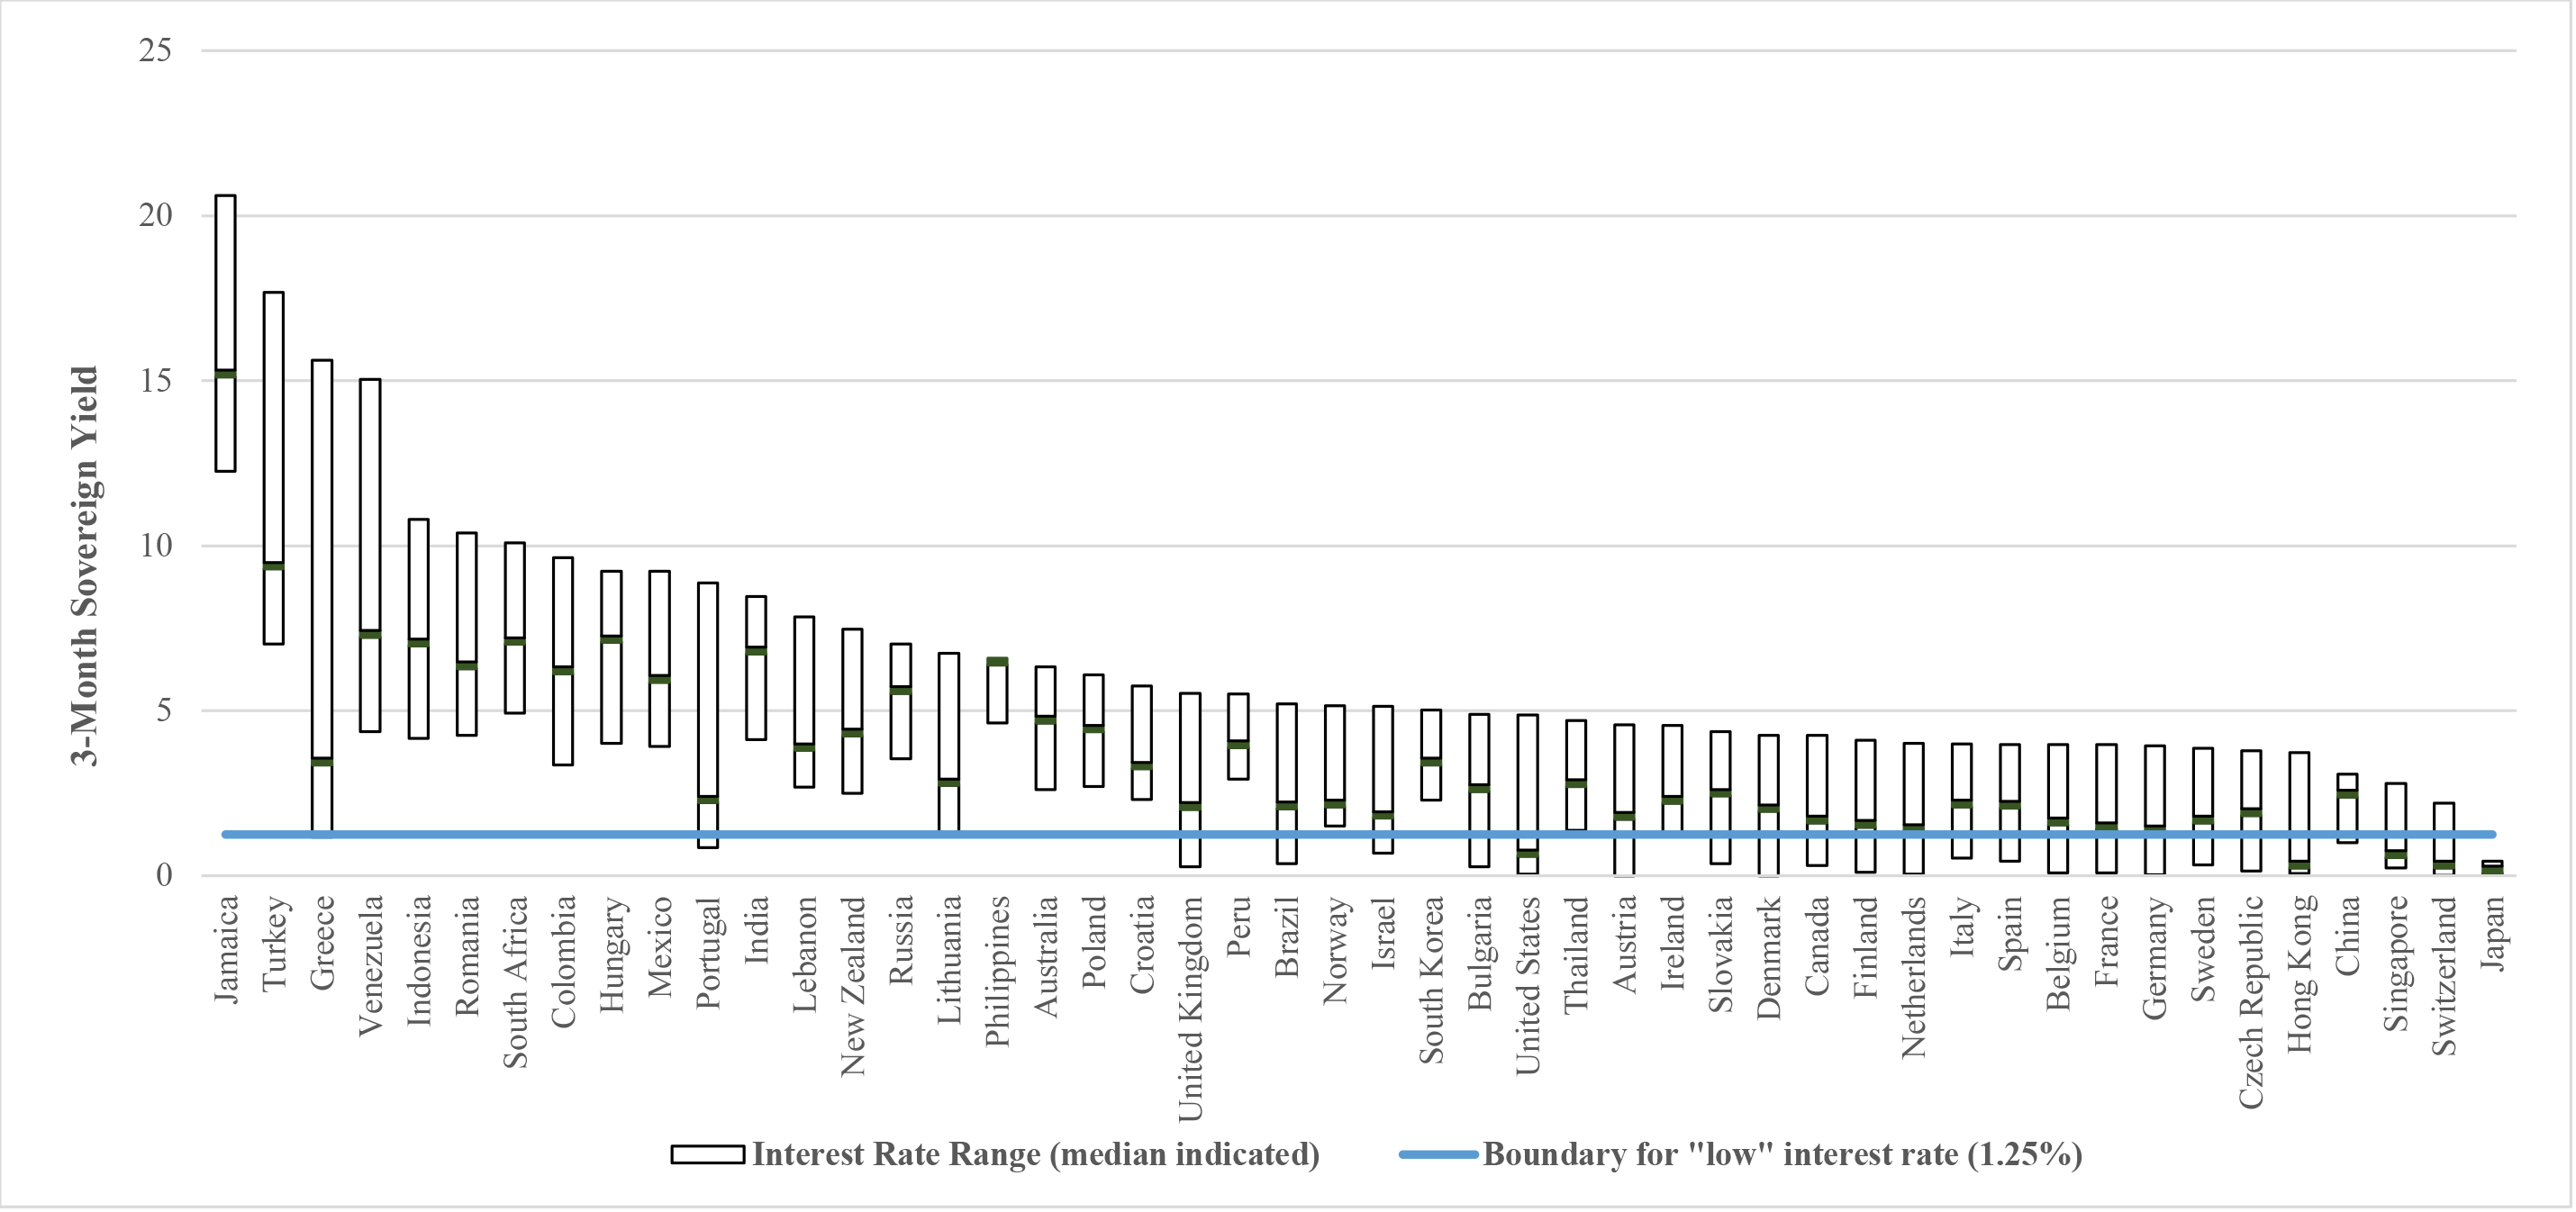 Figure 1: Range of 3-Month Sovereign Yield by Country (2005-2013). See accessible link for data.